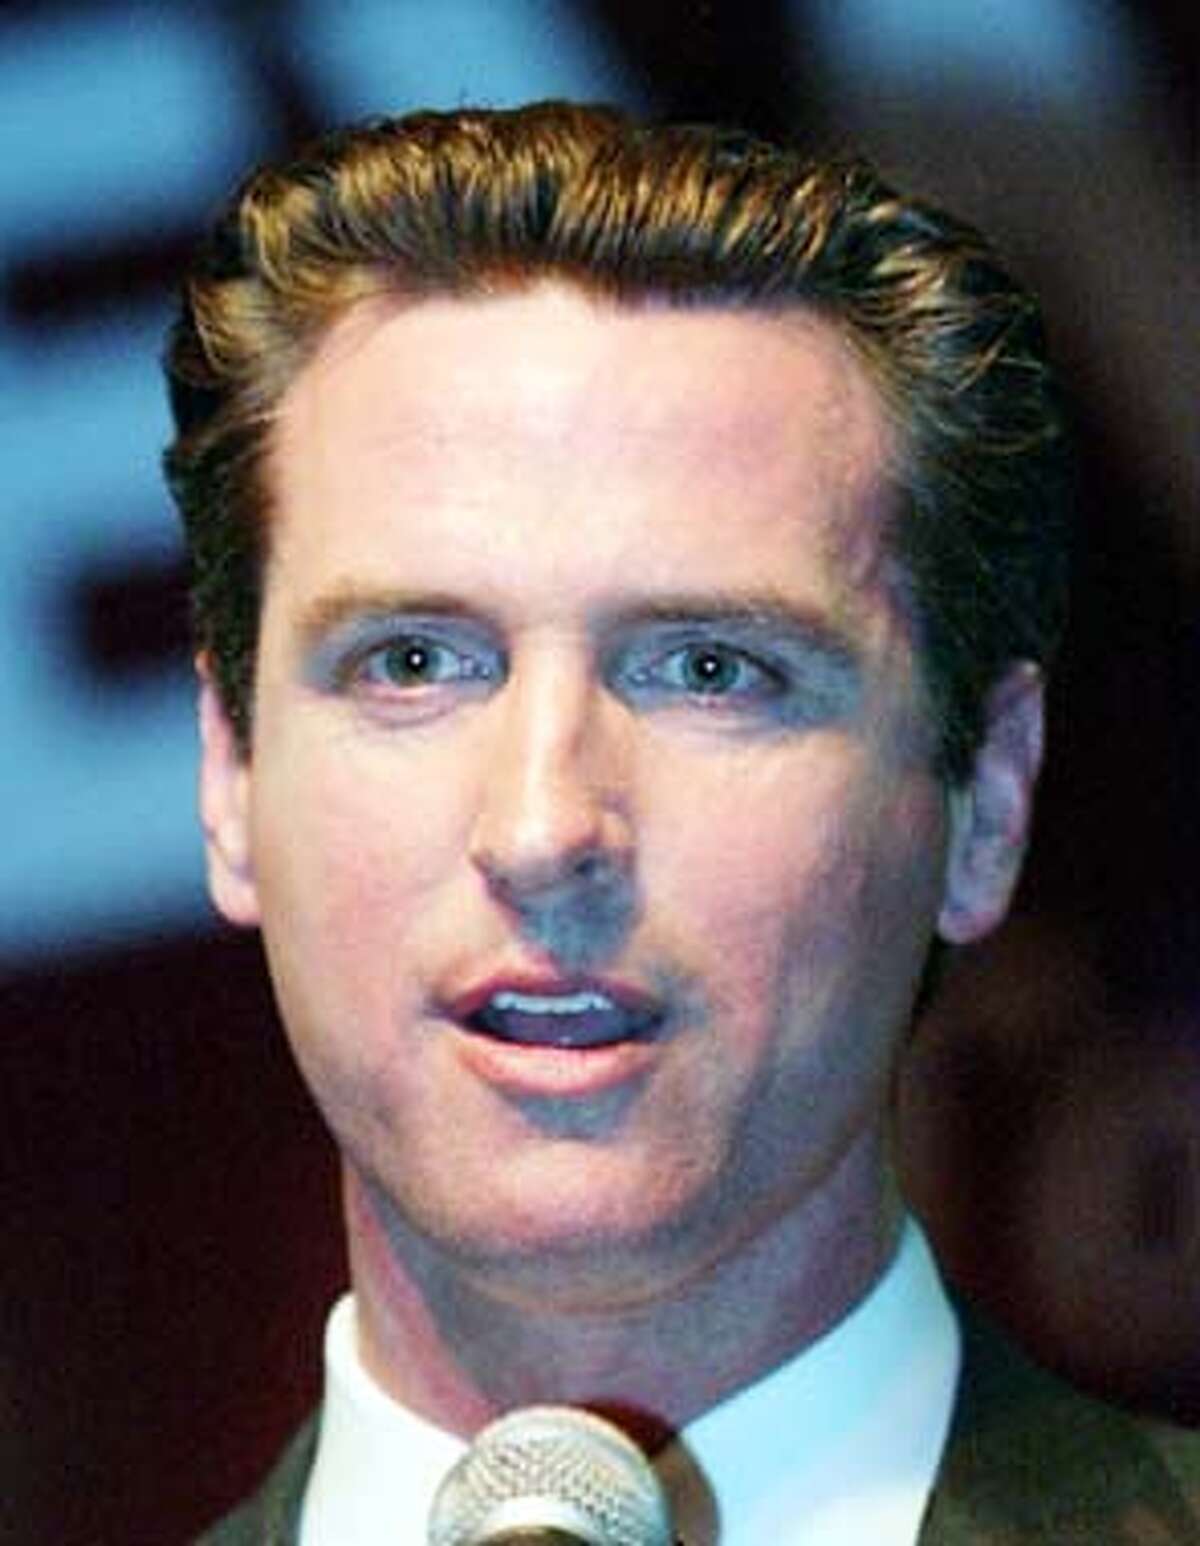 San Franicisco mayoral candidate Supervisor Gavin Newsom addresses supporters at an election night party in San Francisco, November 4, 2003. Newsom came in first in a field of six major candidates and will face fellow supervisor Matt Gonzalez in a runoff election in December. REUTERS/Lou Dematteis Matt Gonzalez Matt Gonzalez is picking up voters from Alioto, Ammiano and Leal, the poll shows. Matt Gonzalez is picking up voters from Alioto, Ammiano and Leal, the poll shows. Matt Gonzalez Matt Gonzalez